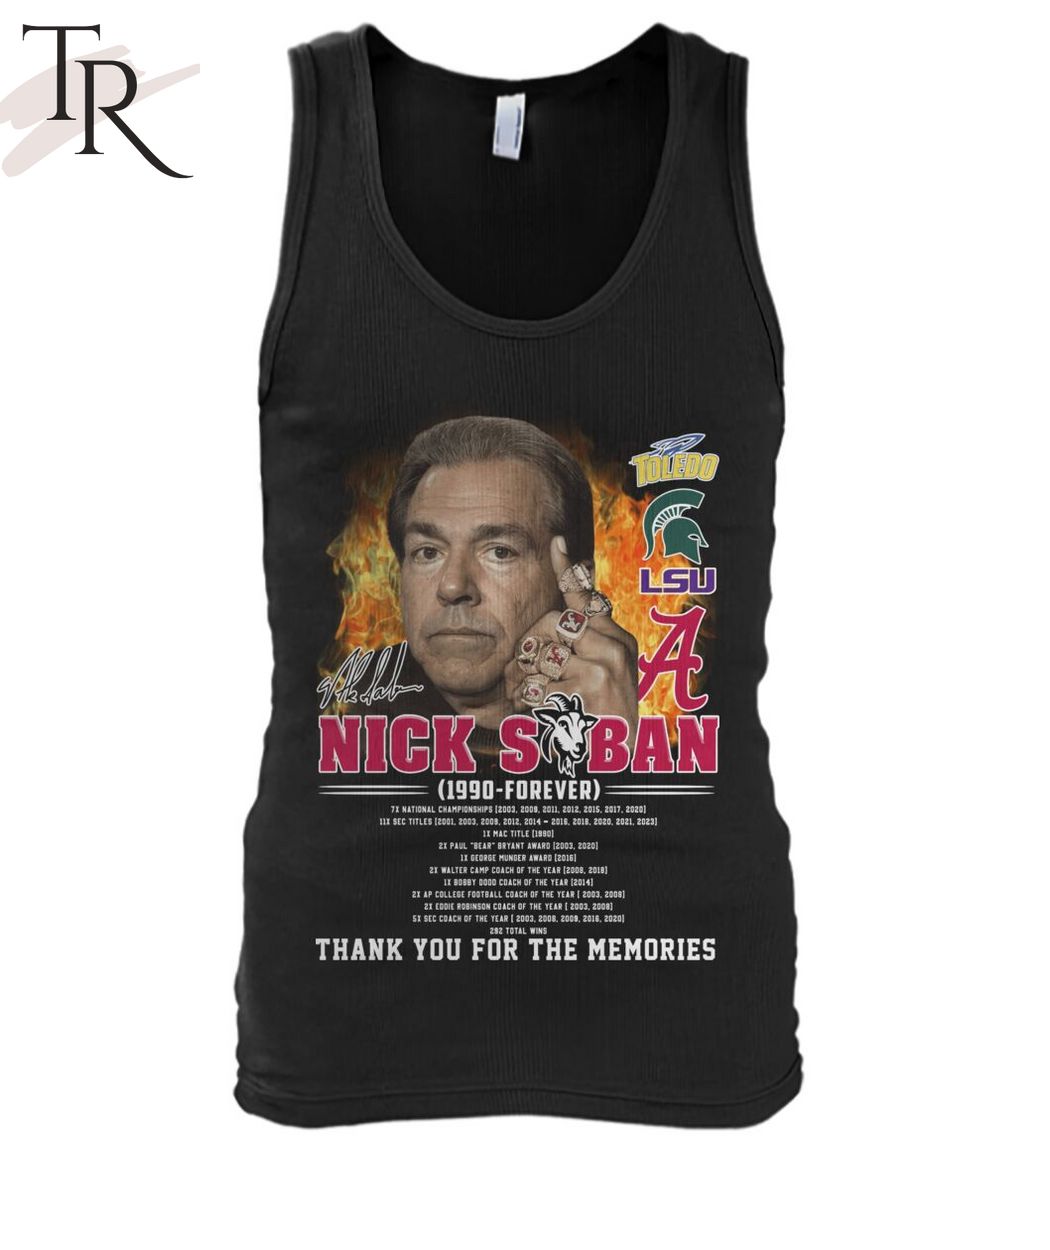 Nick Saban 1990 - Forever Thank You For The Memories T-Shirt